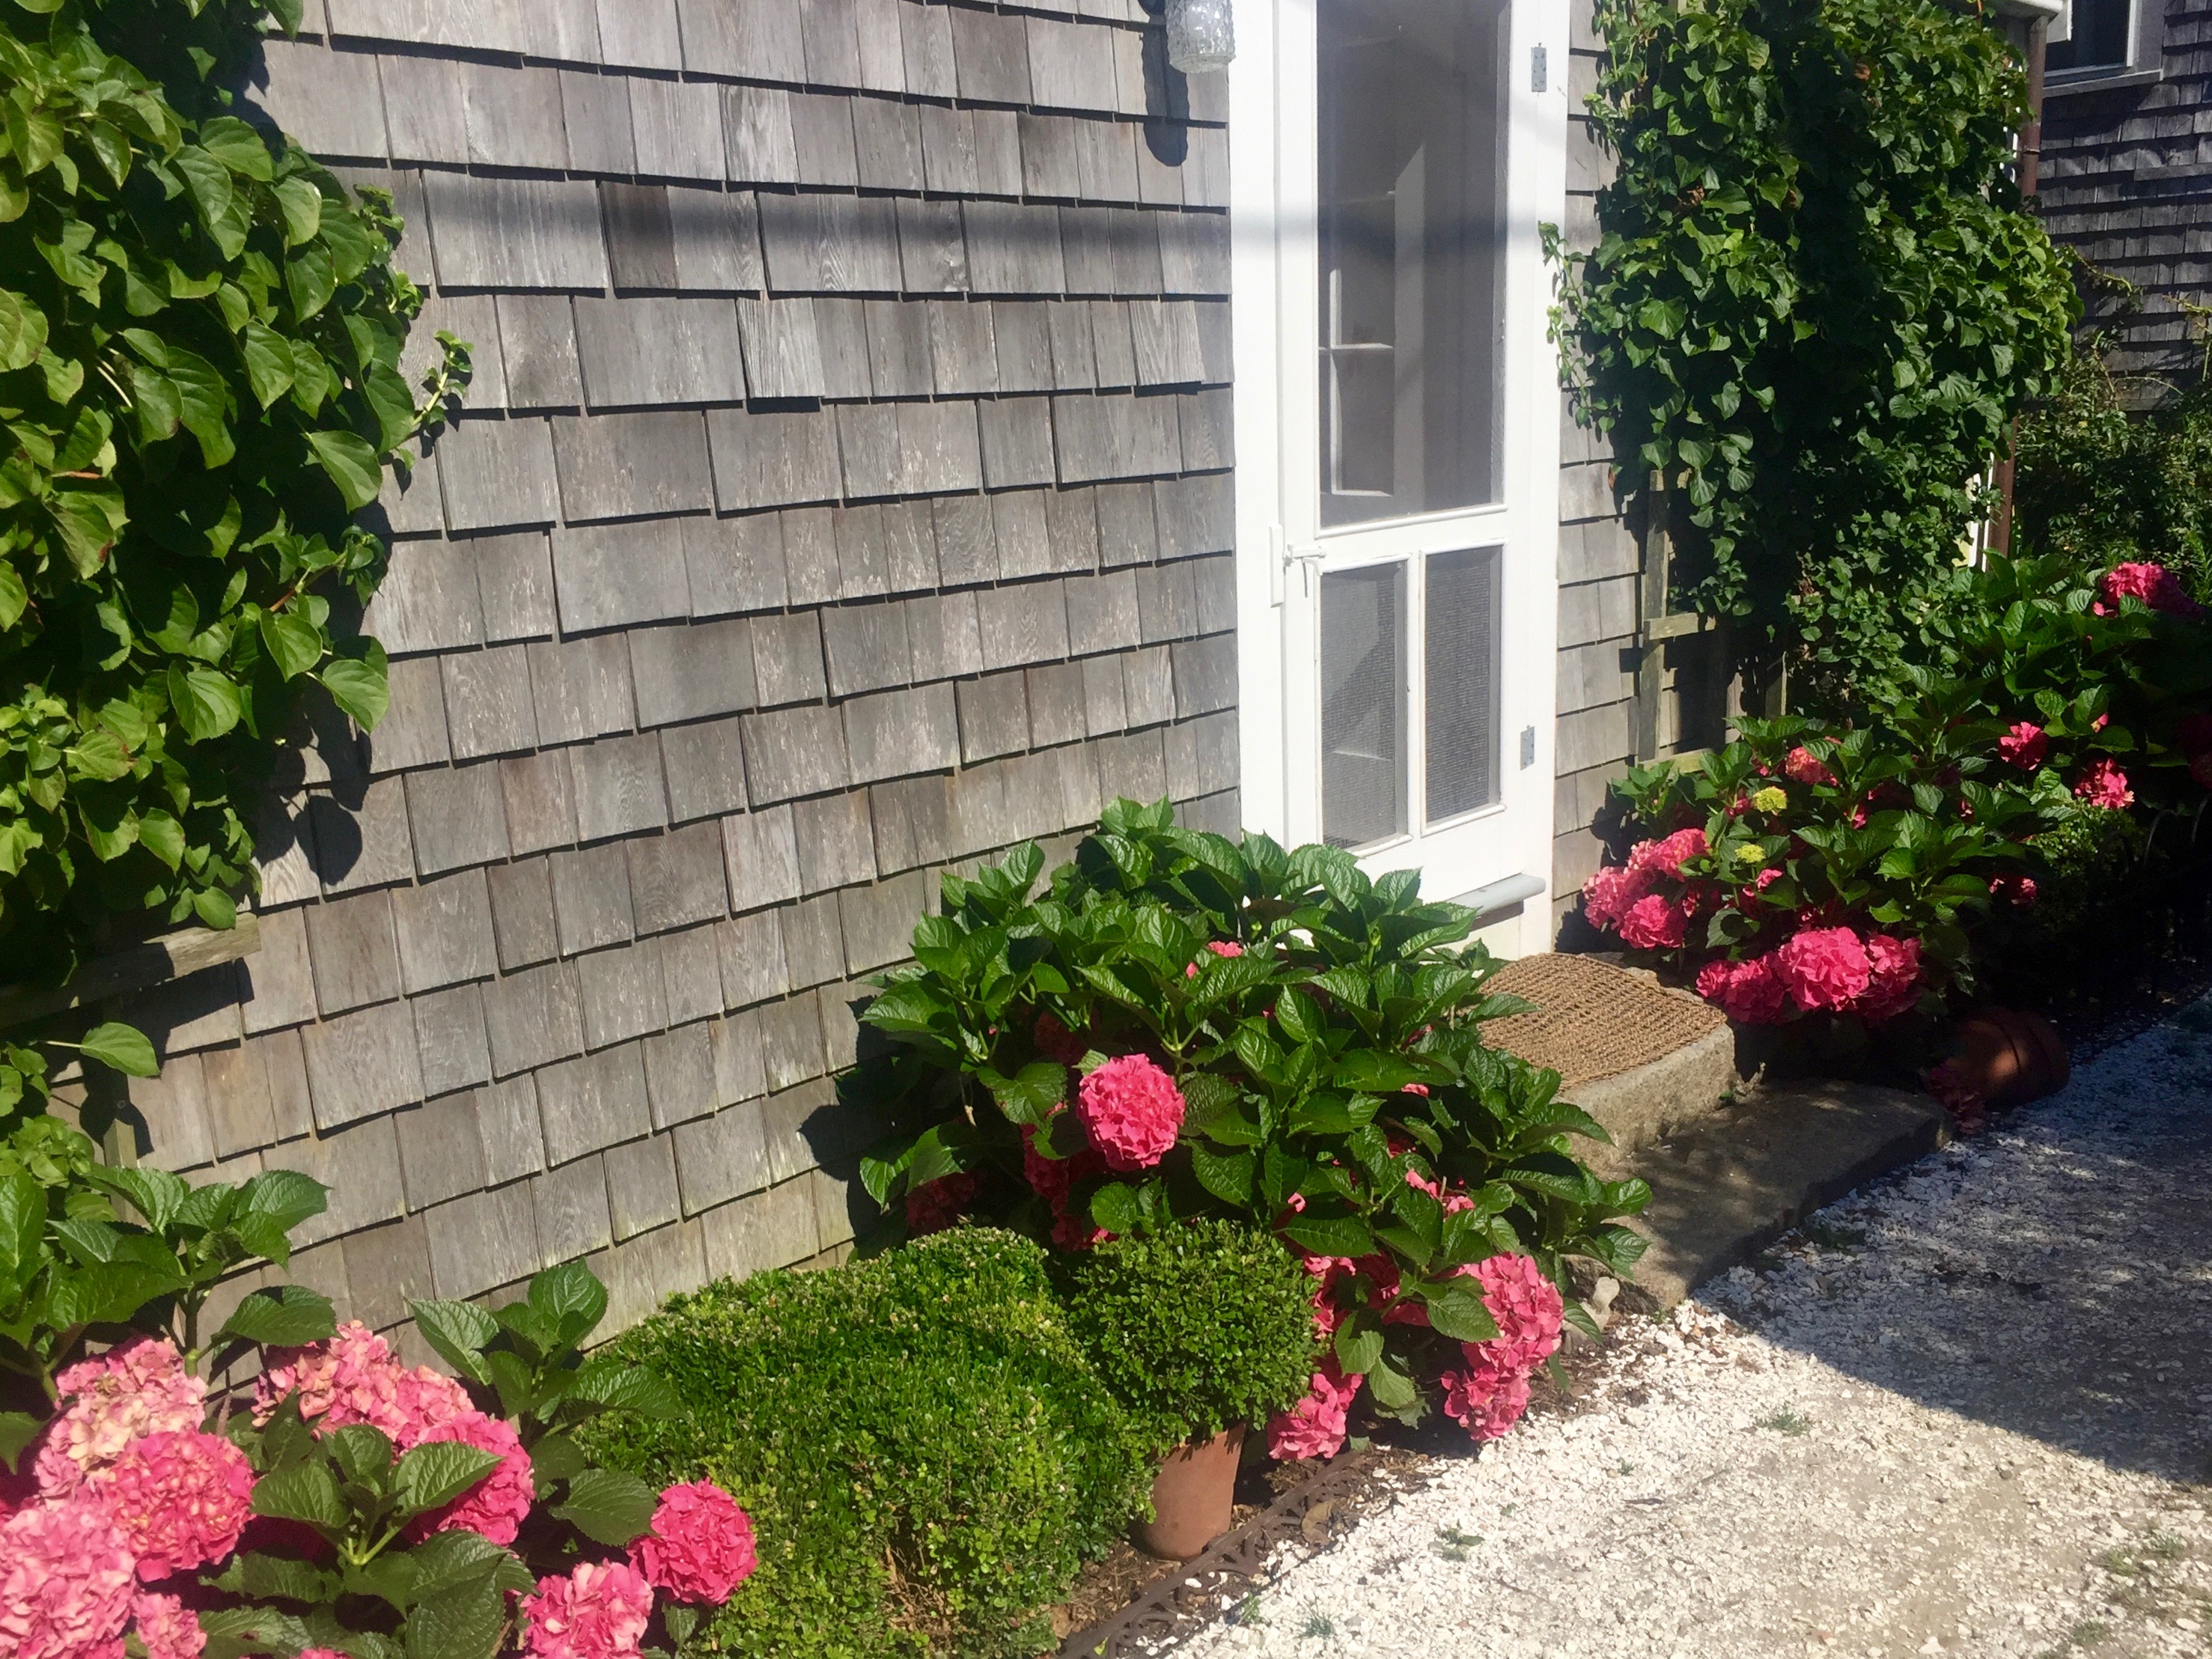 Photos of Nantucket by Christina Dandar for The Potted Boxwood 12